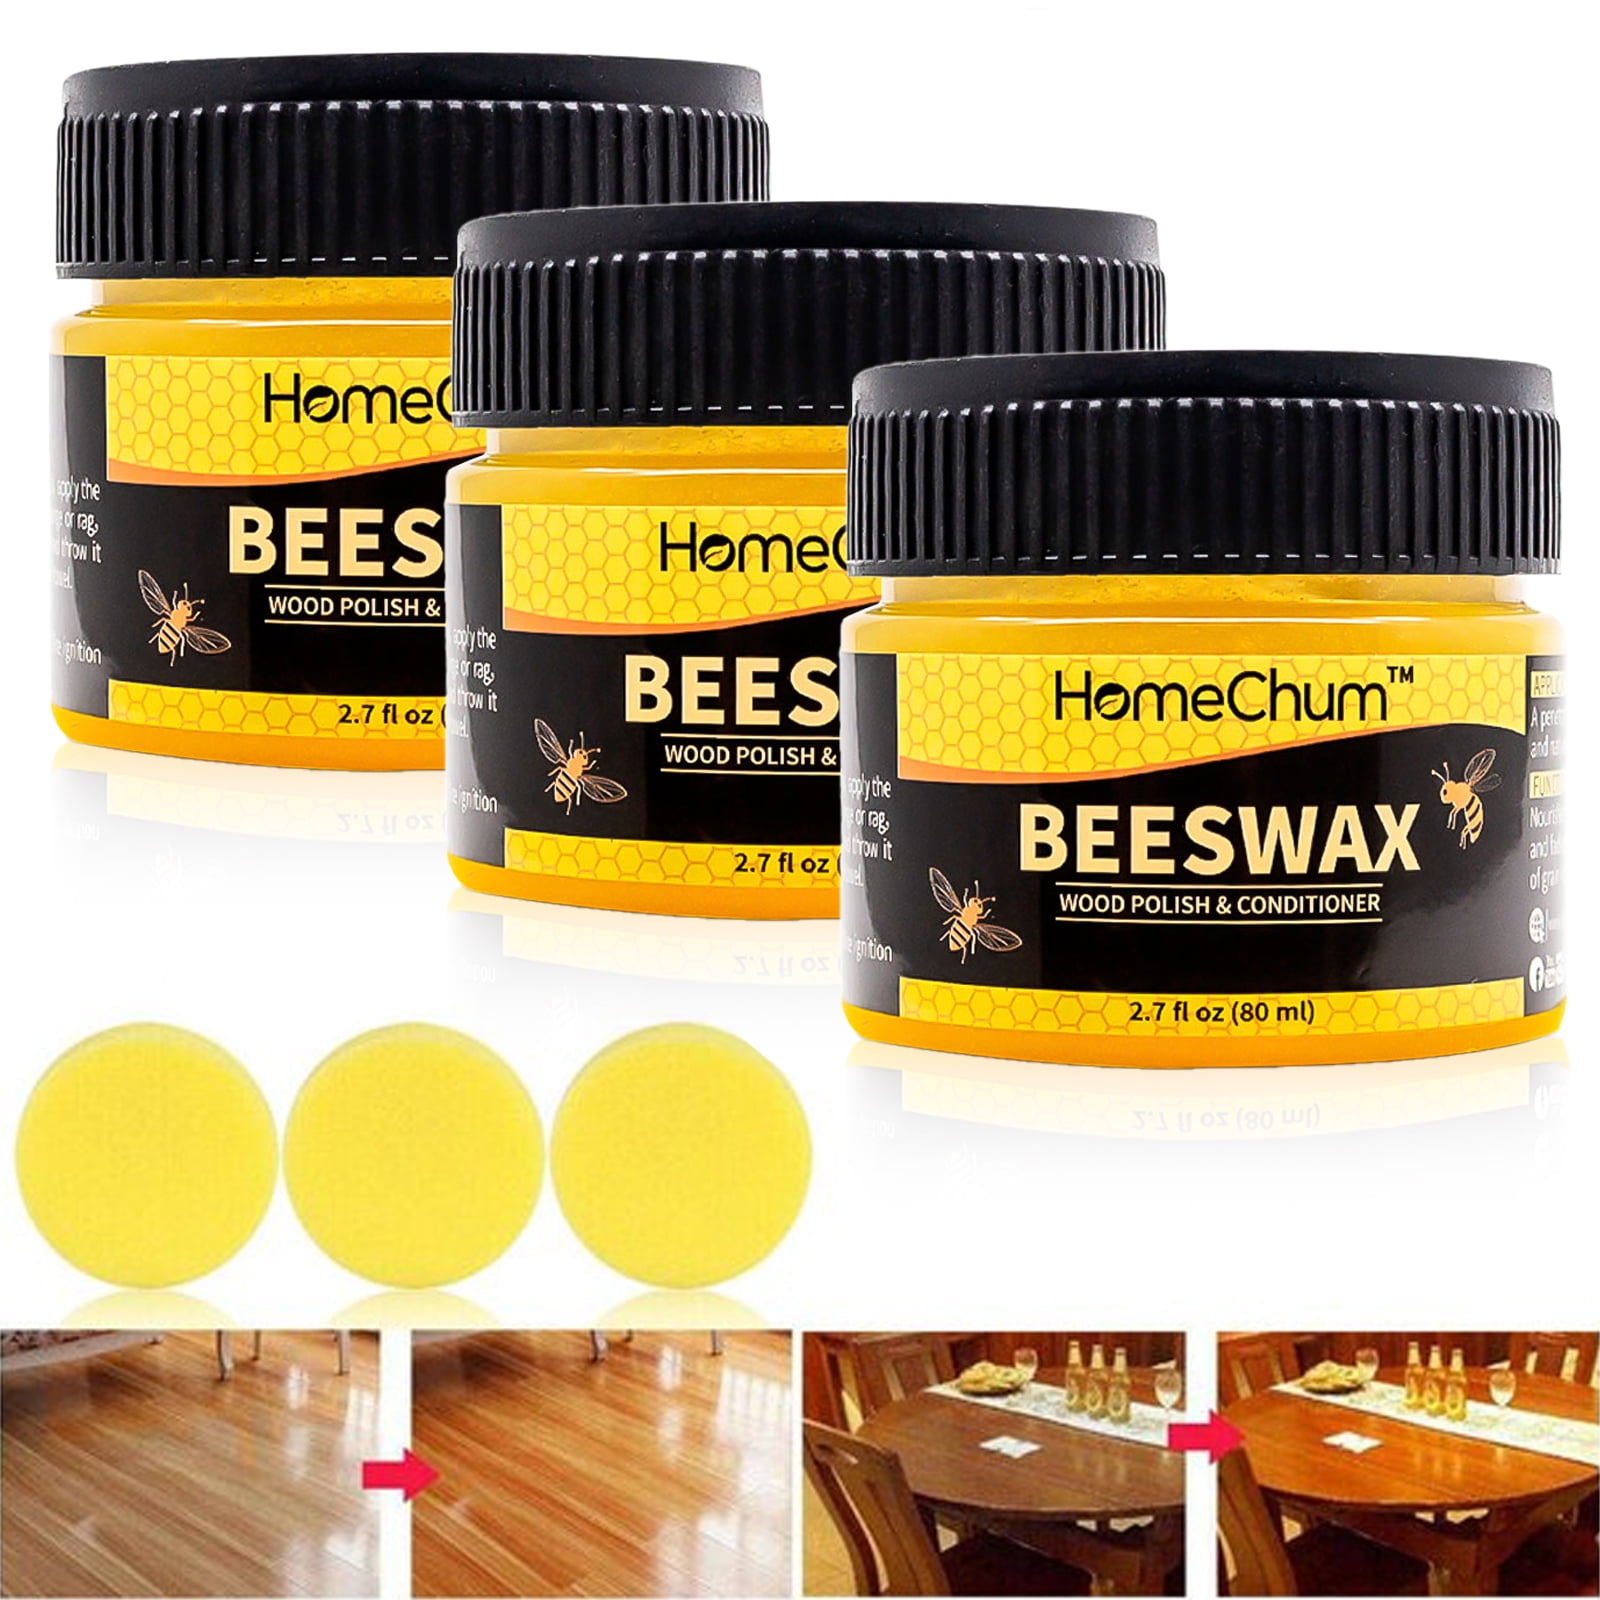 Premium Natural Beeswax Home Furniture Care Polishing Bee Wax Conditioner Wood 